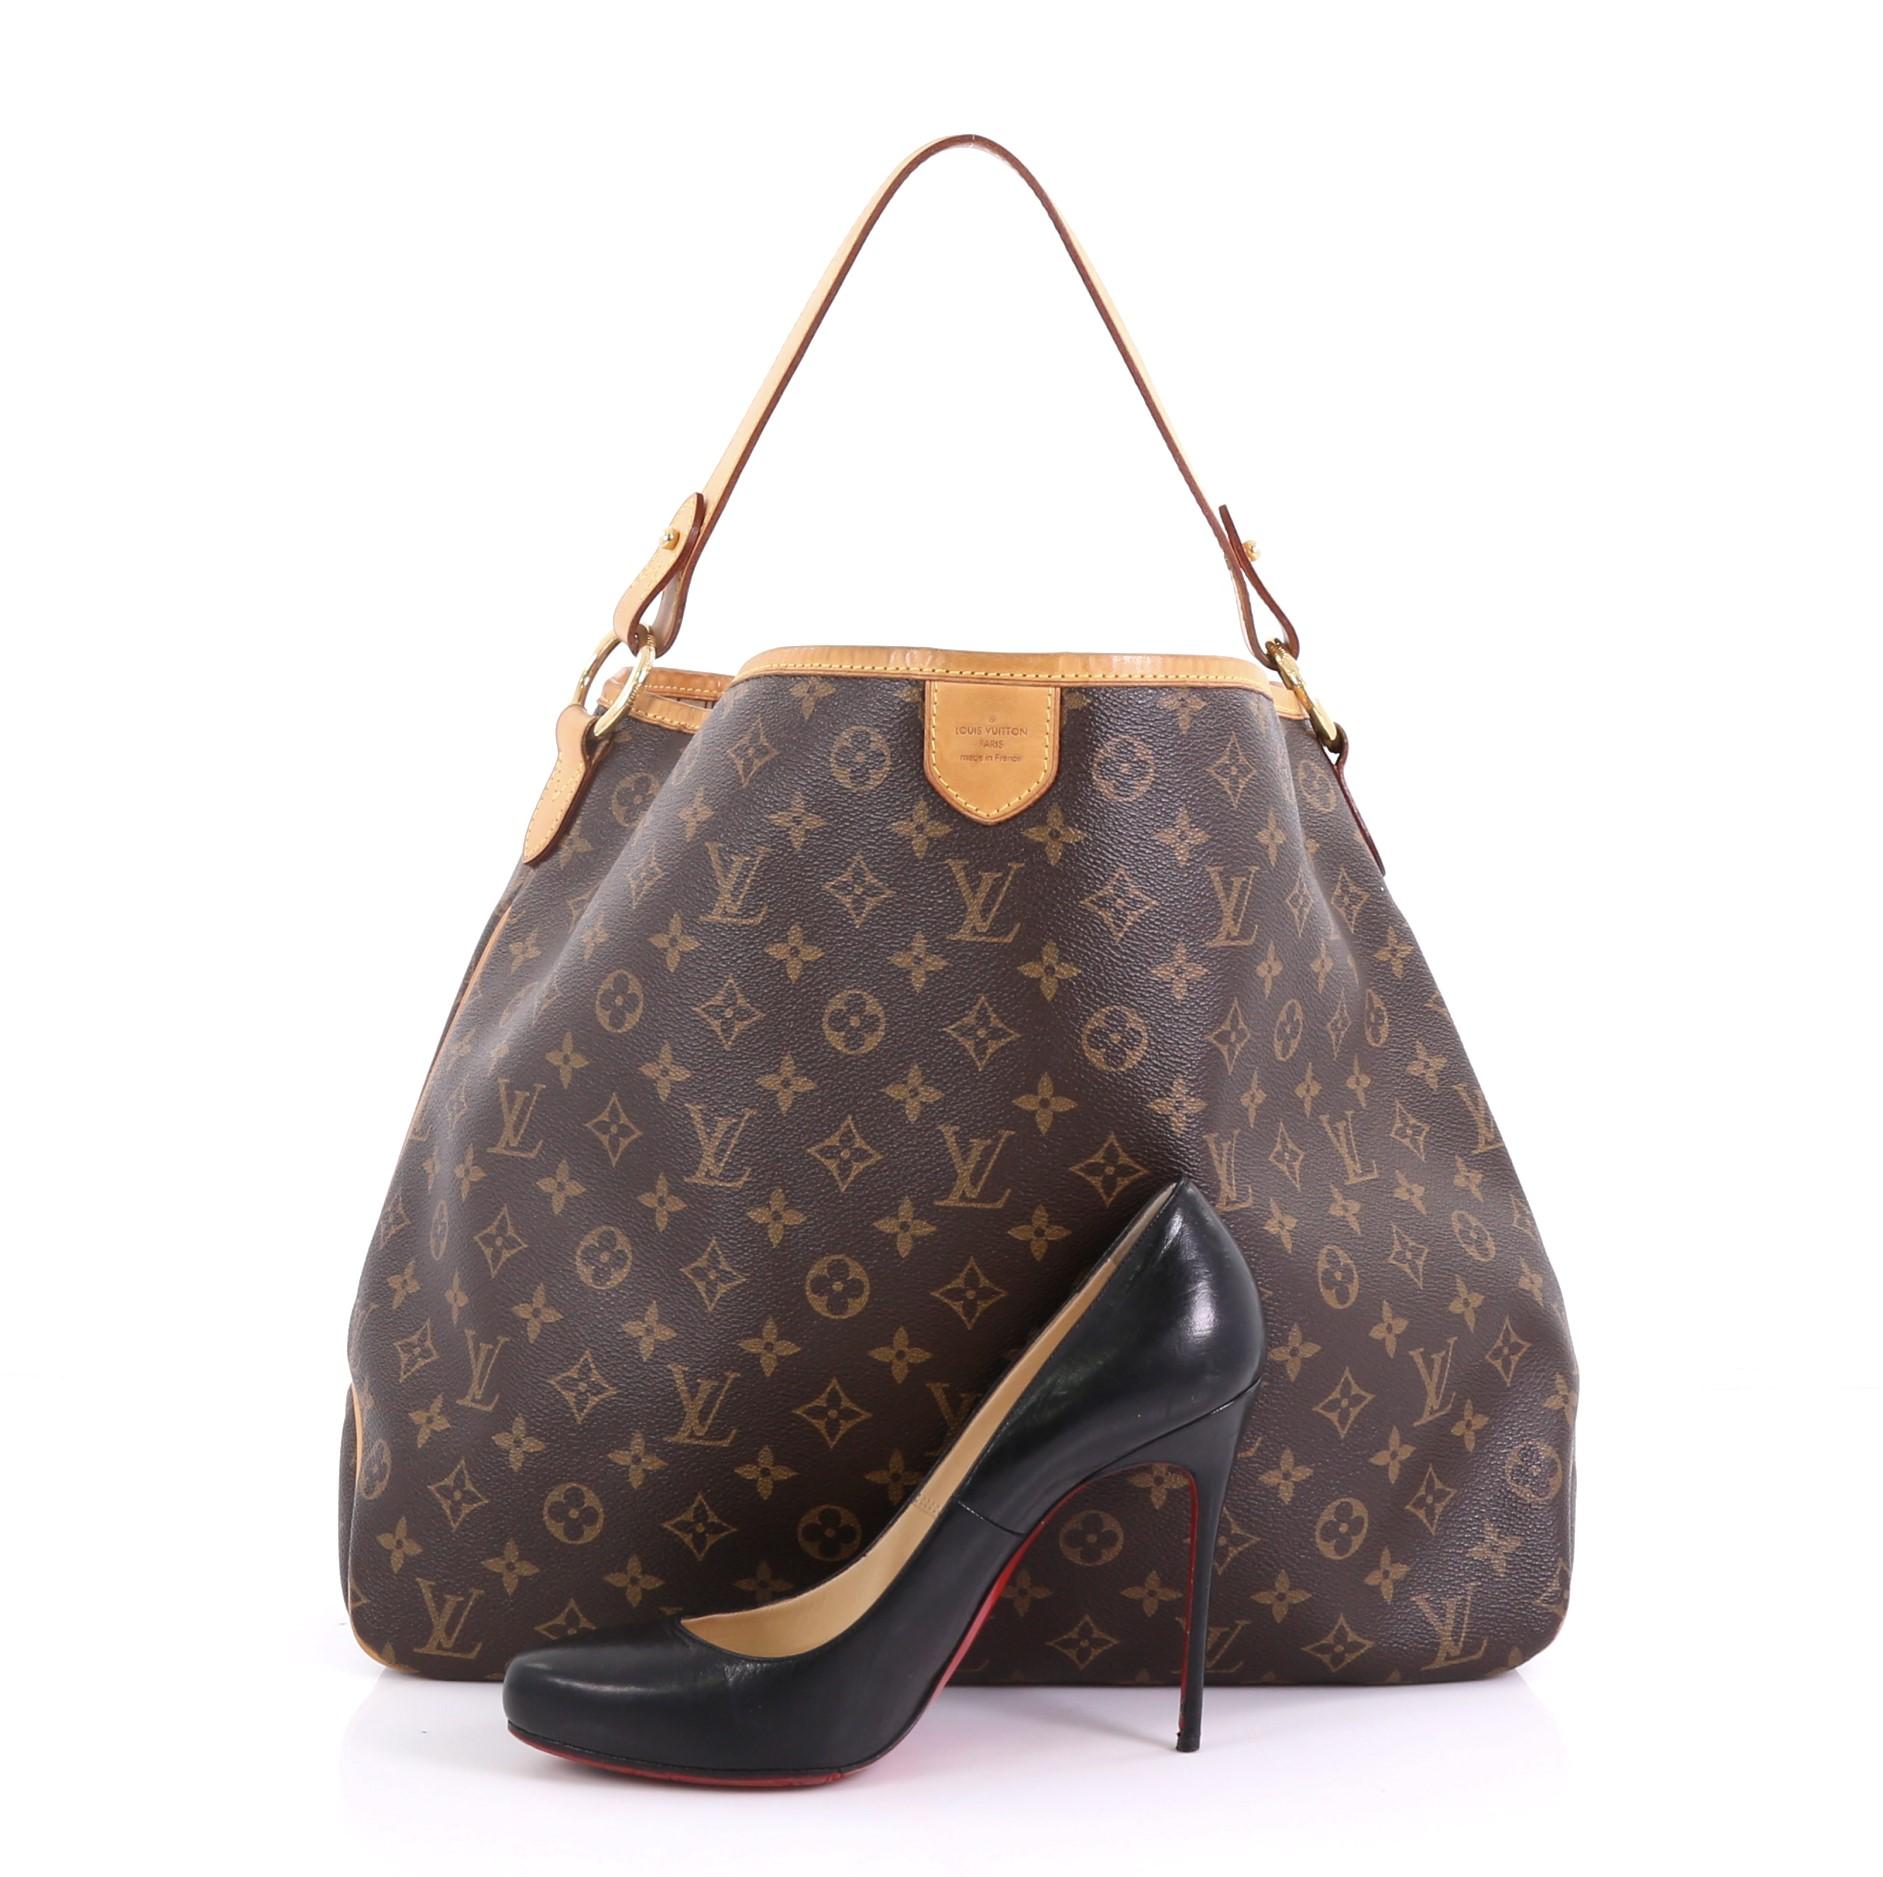 This Louis Vuitton Delightful Handbag Monogram Canvas MM, crafted in brown monogram coated canvas, features a flat leather loop handle, cowhide leather trim, and gold-tone hardware. Its snap hook closure opens to a brown fabric interior with side